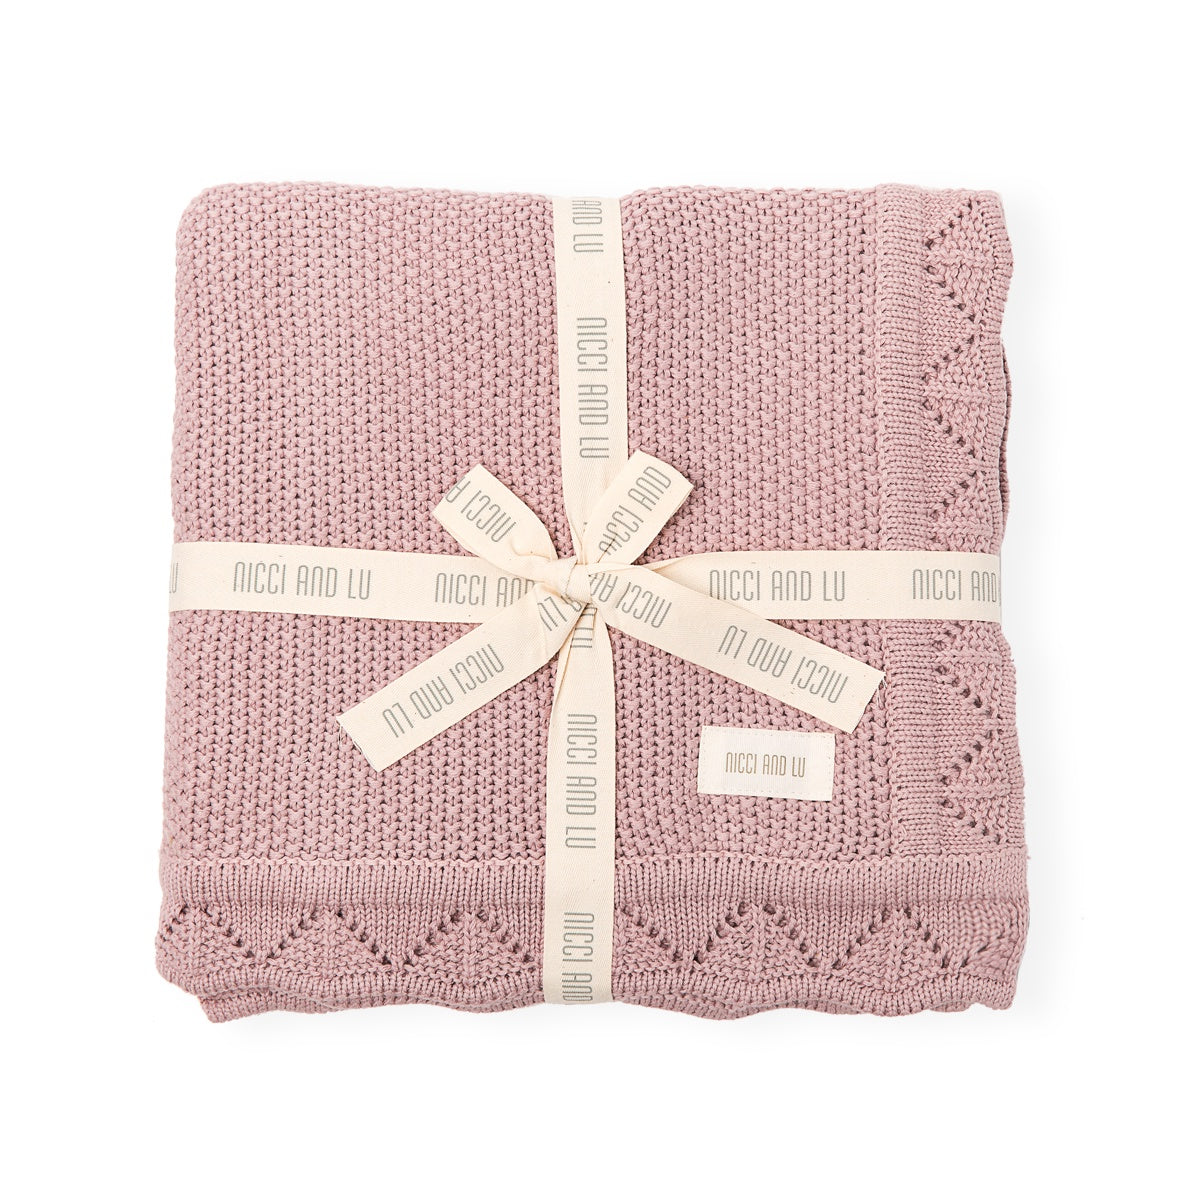 Heirloom Knitted Blanket - Pale Mauve